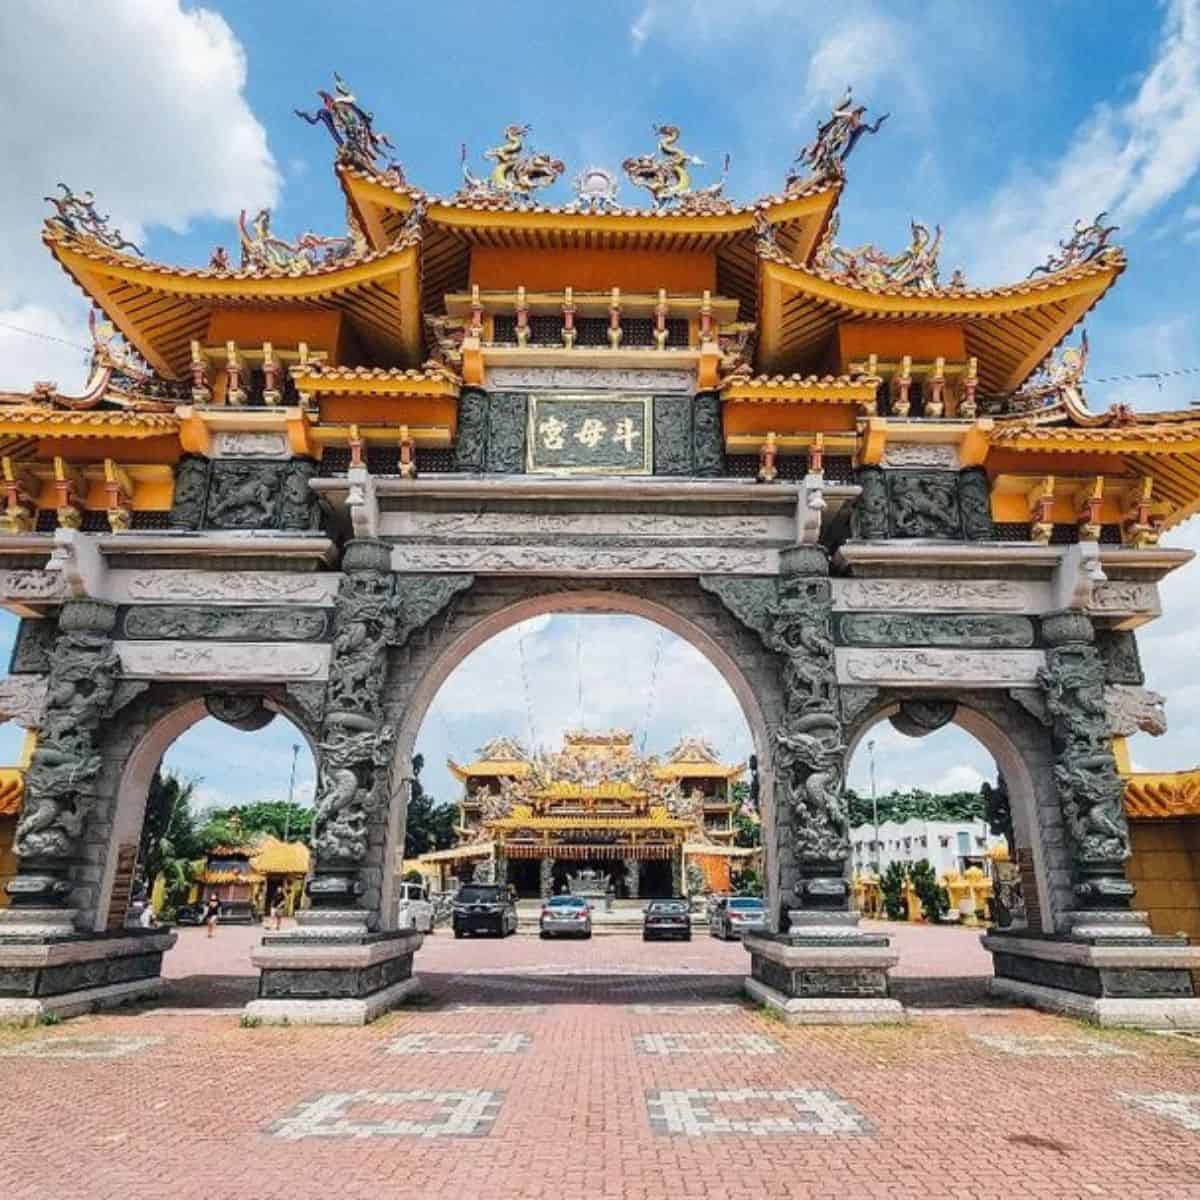 Gigantic entrance gate of Nine Emperor Gods Temple in Penang with intricate designs